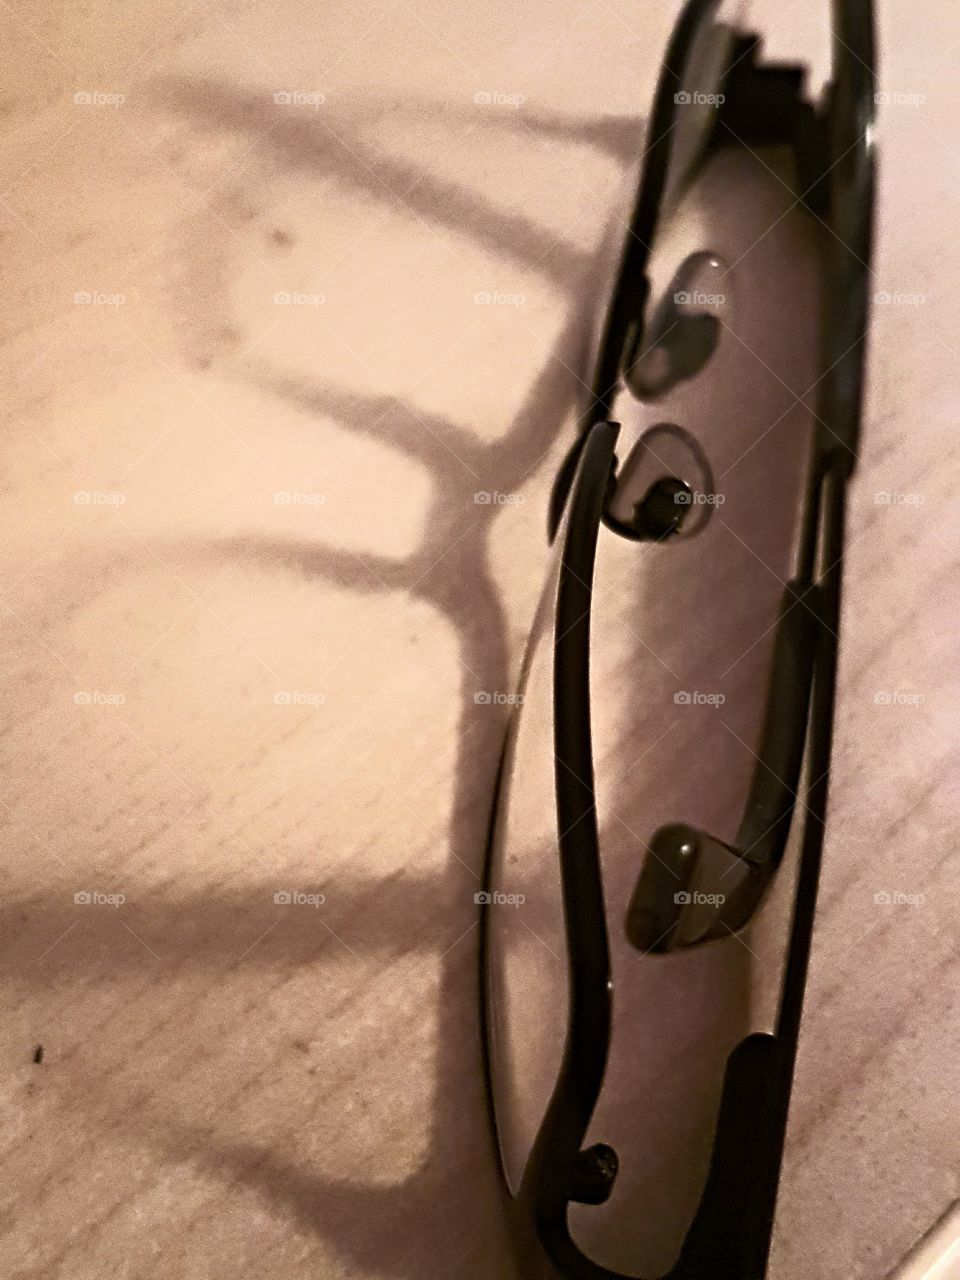 Shadow of glasses